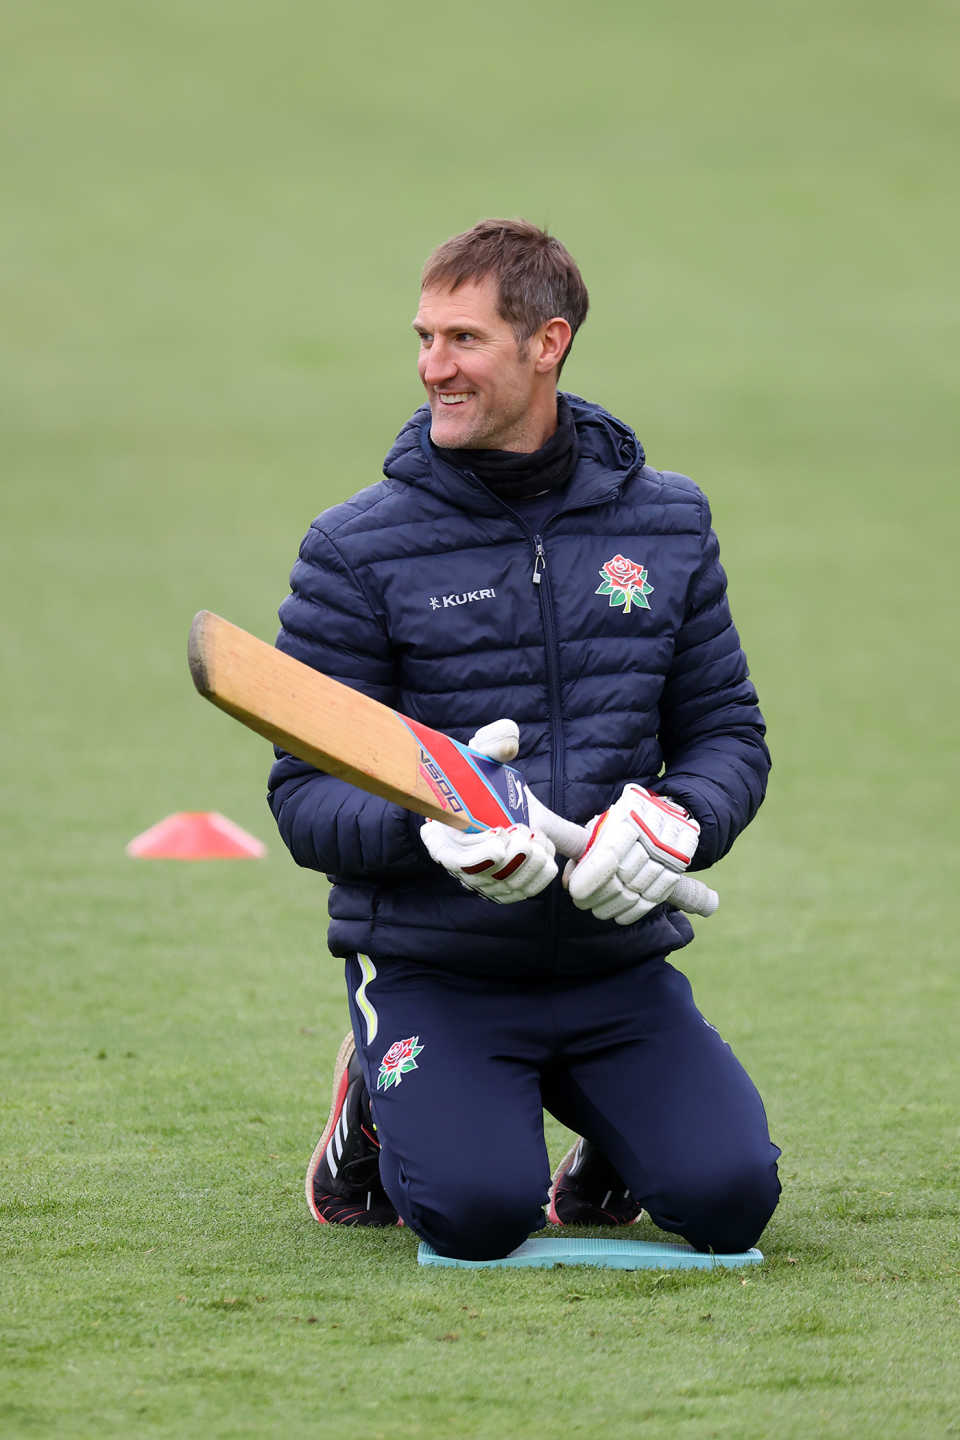 Mark Chilton undertakes a catching drill, Lancashire vs Sussex, County Championship, Old Trafford, April 9, 2021